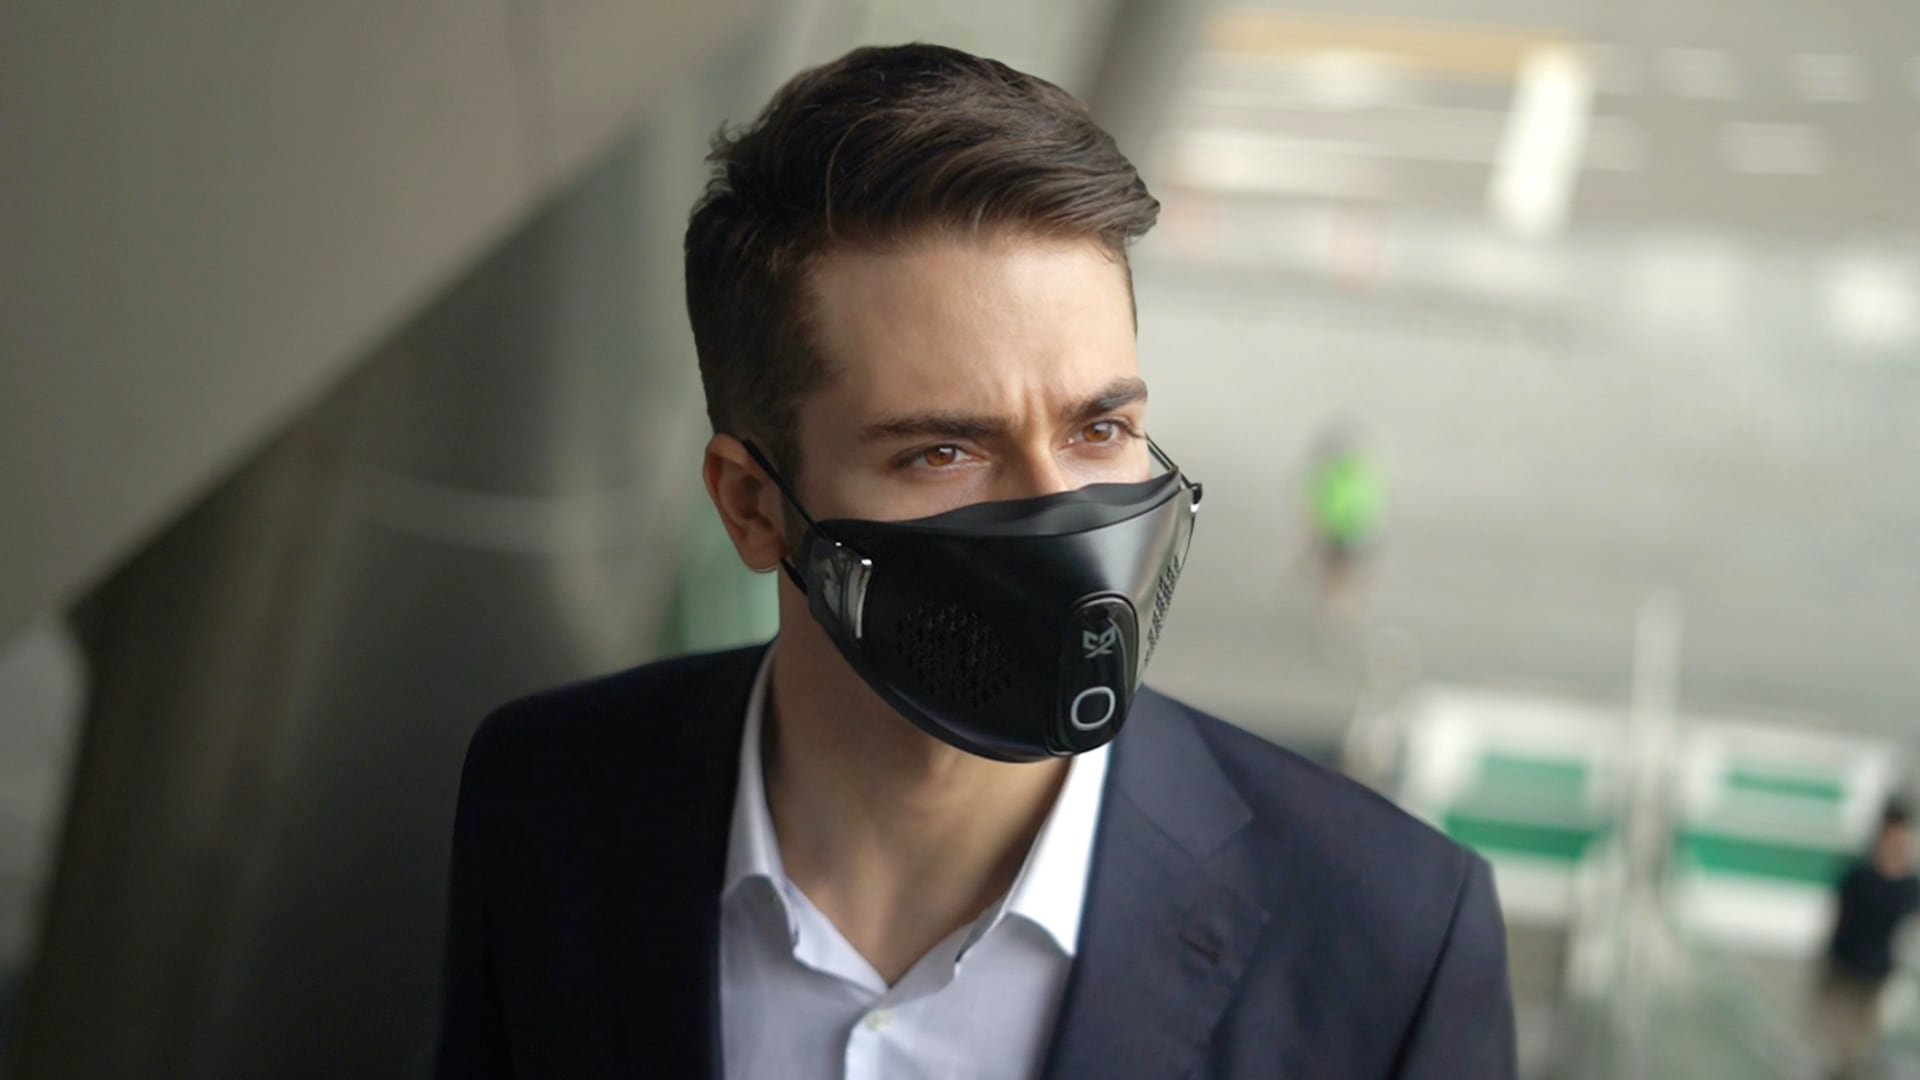 CX9 customizable smart mask filters bacteria out of the air you breathe